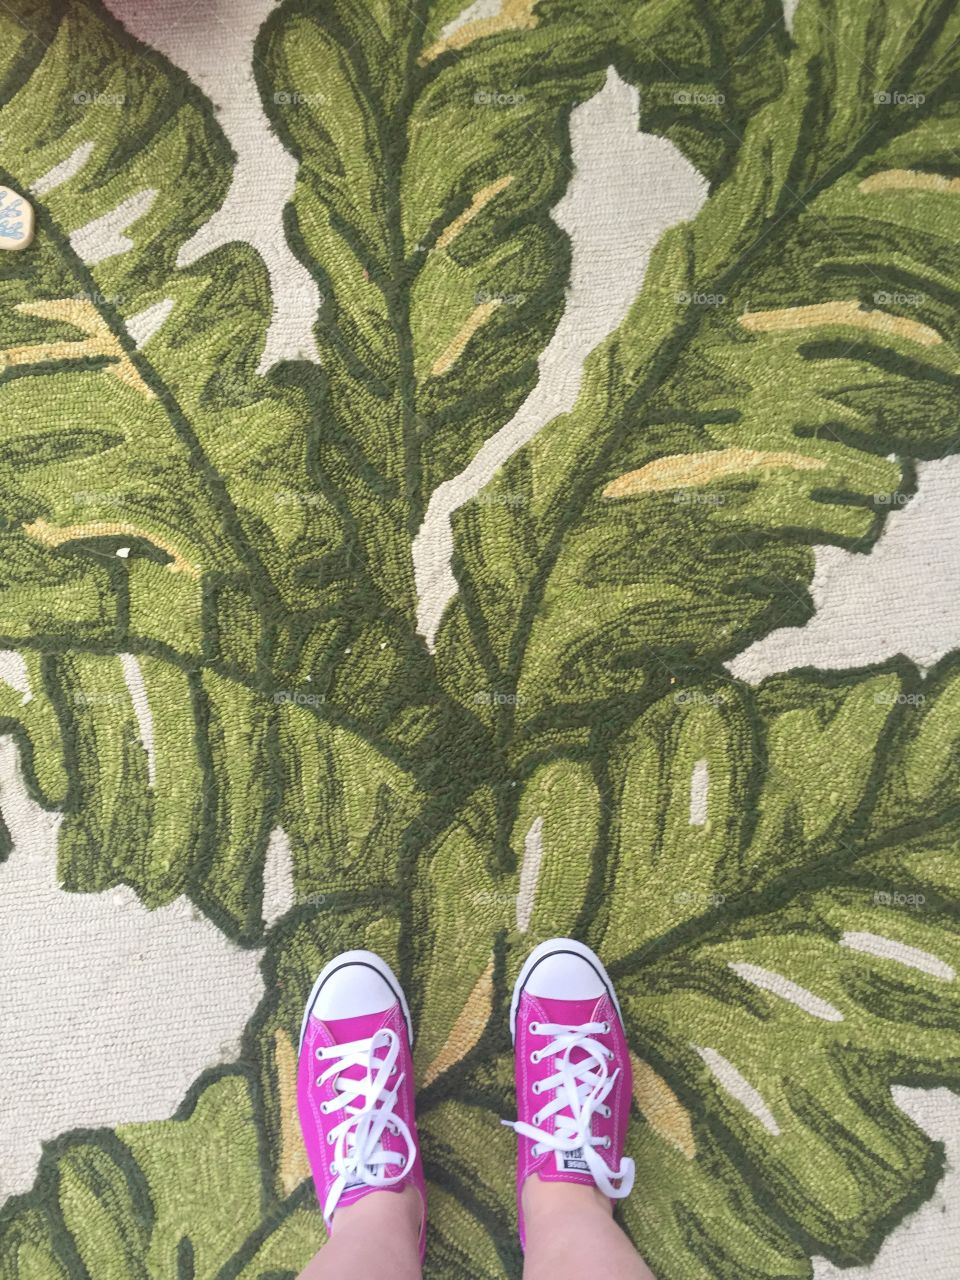 Pink converse sneakers on a rug